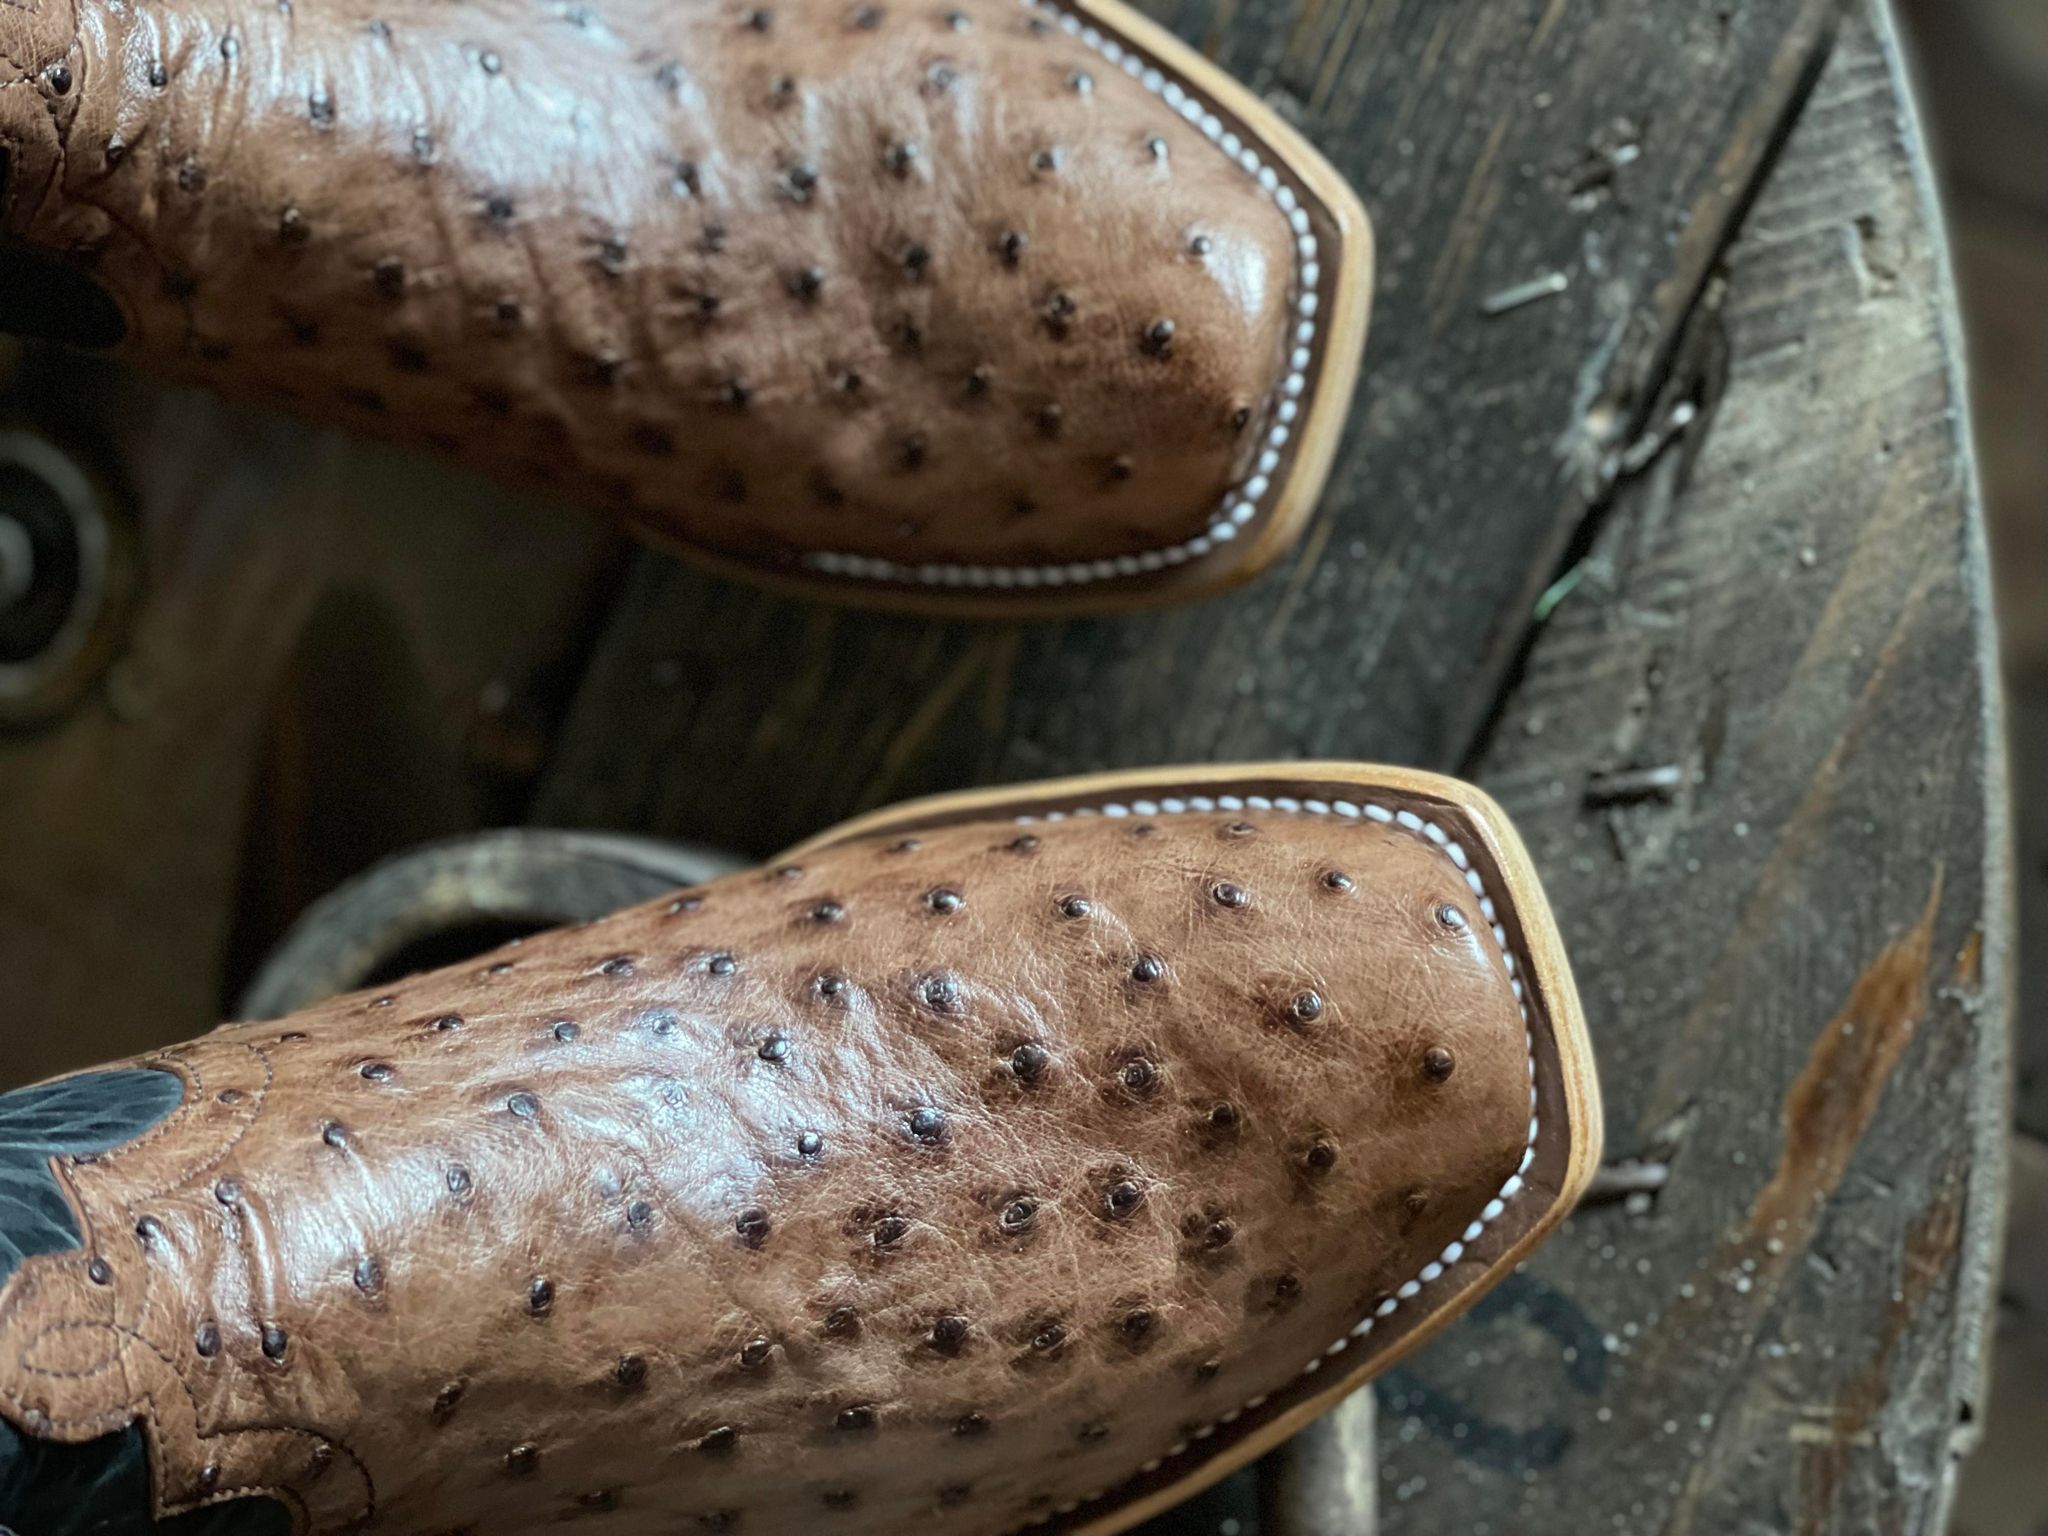 HP Top Hand Kango Tobacco Full Quill Boots-Men's Boots-Anderson Bean-Lucky J Boots & More, Women's, Men's, & Kids Western Store Located in Carthage, MO